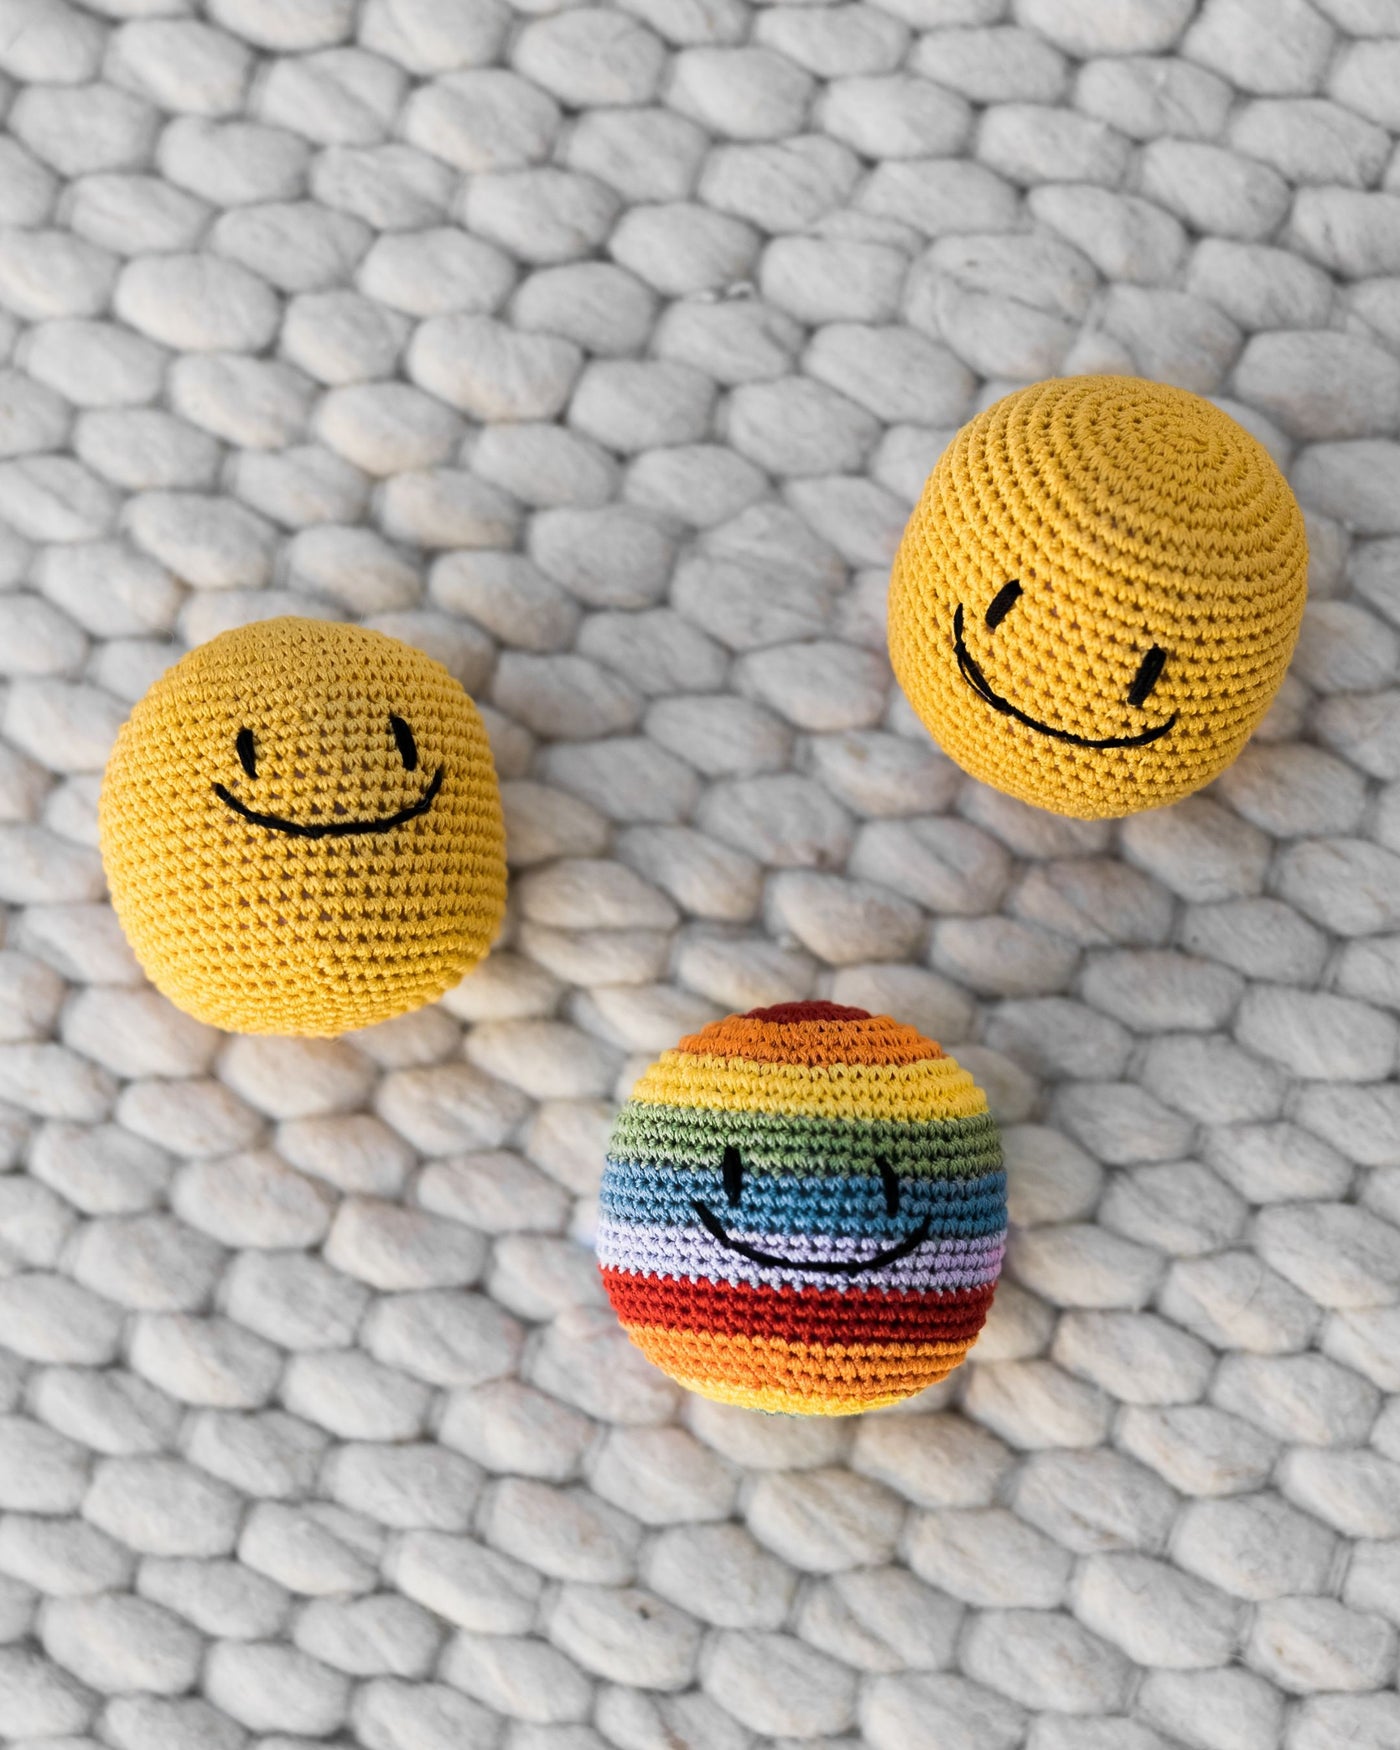 Basic Studio Smiley Face Ball in Rainbow Product Image Detail